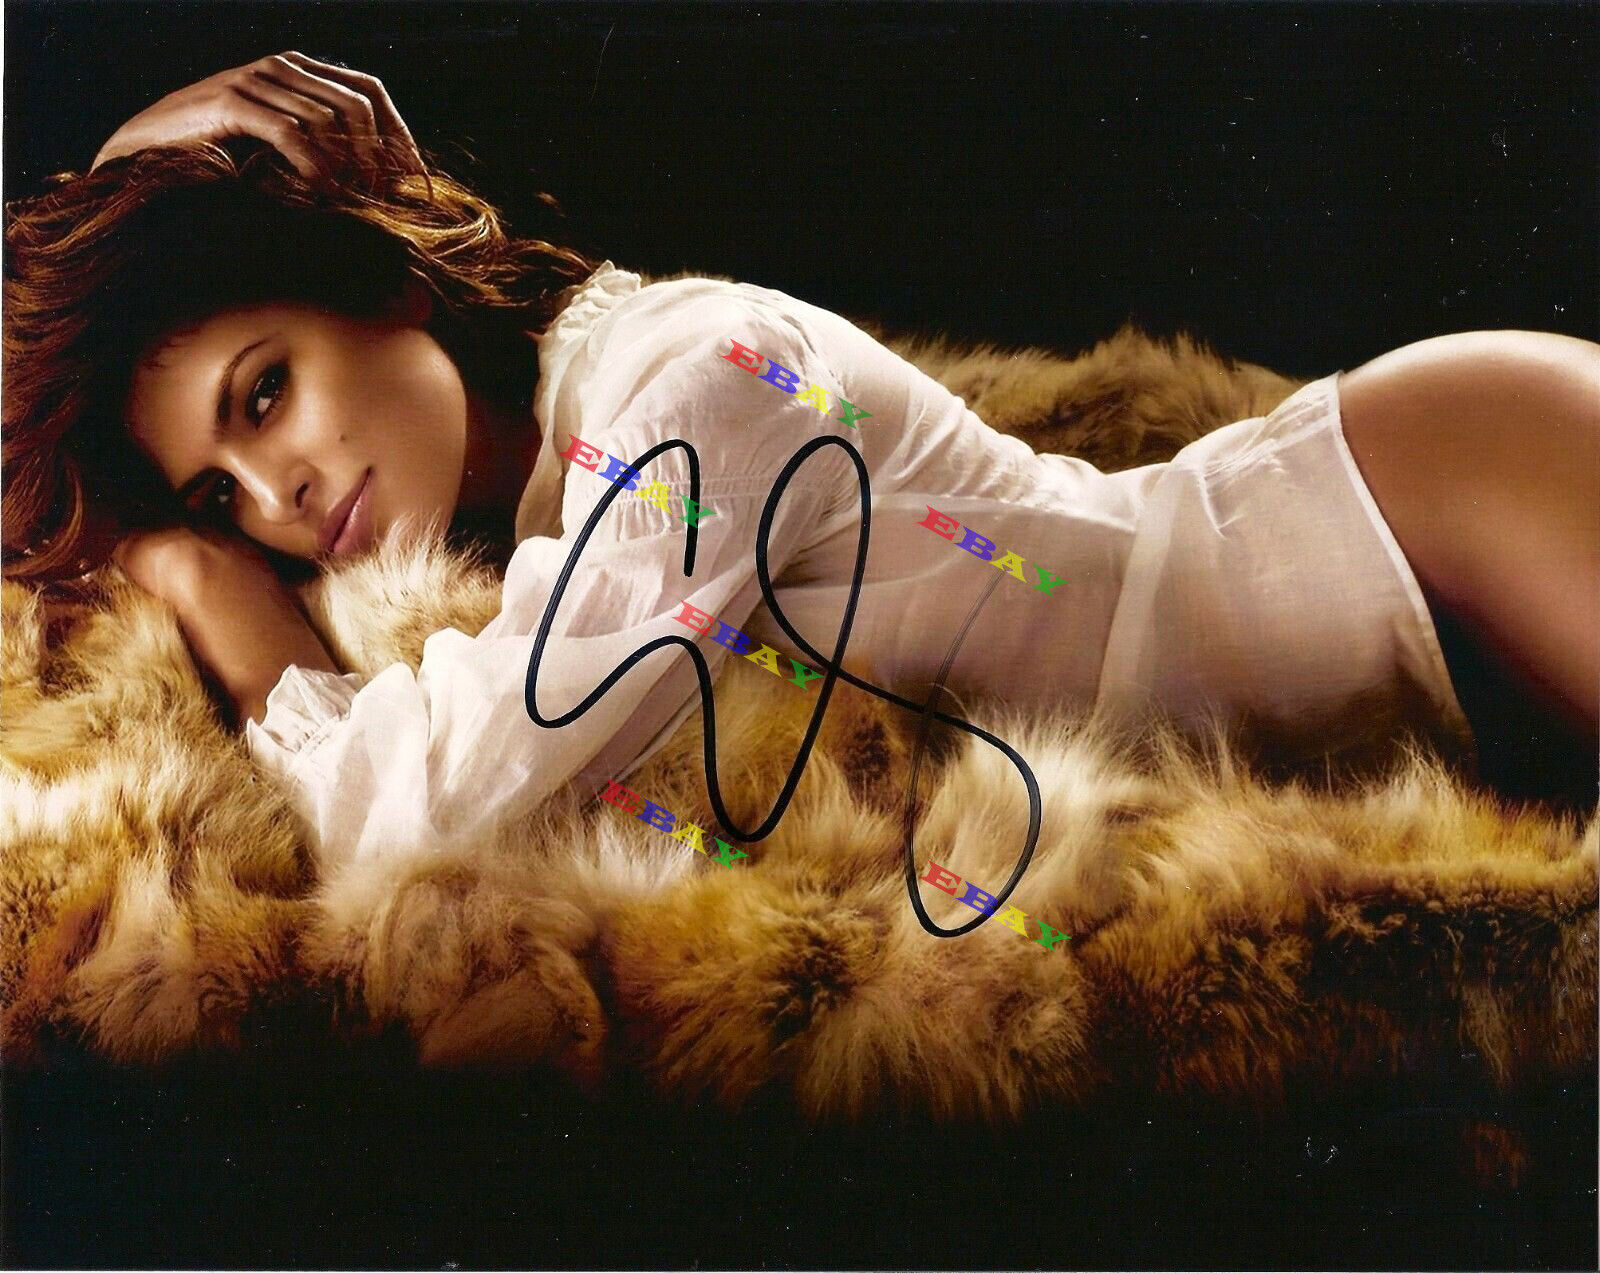 Eva Mendes Fast & Furious Autographed Signed 8x10 Photo Poster painting Reprint